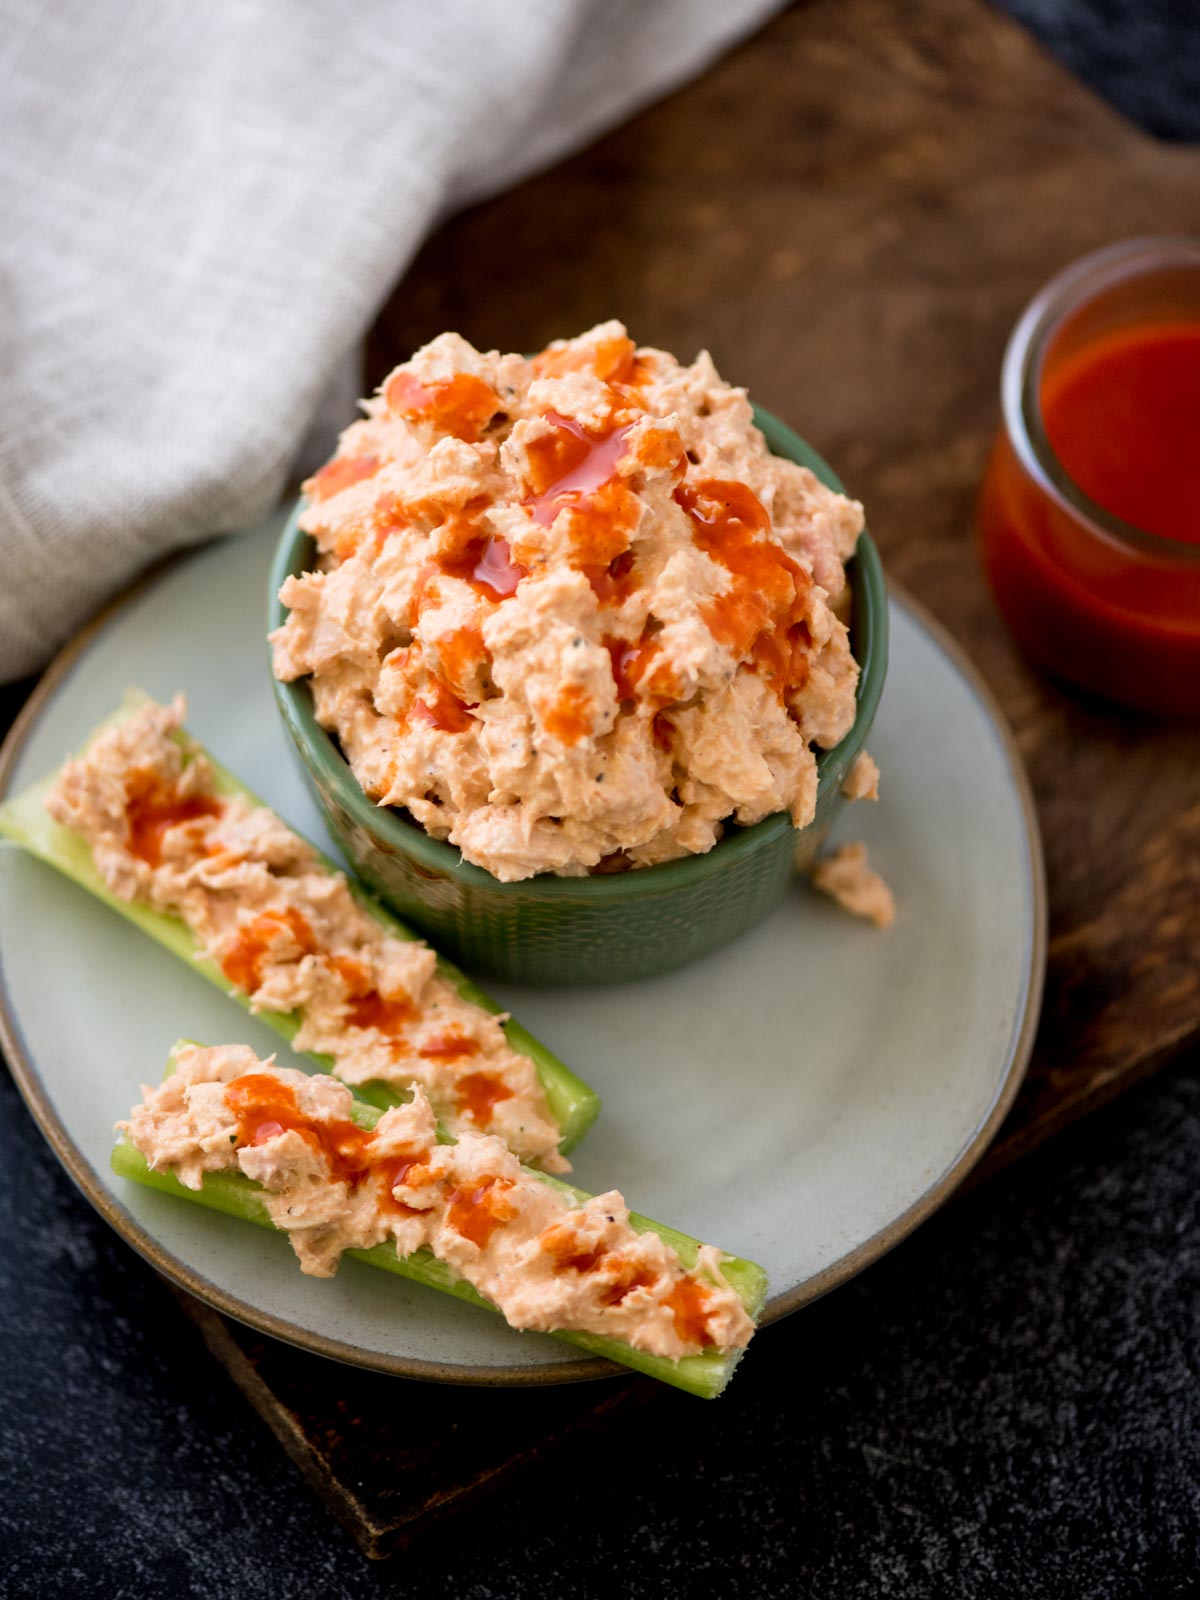 buffalo tuna salad in a bowl with tuna salad stuffed in celery on a plate. It's surrounded by buffalo sauce on a bread board and a kitchen towel.